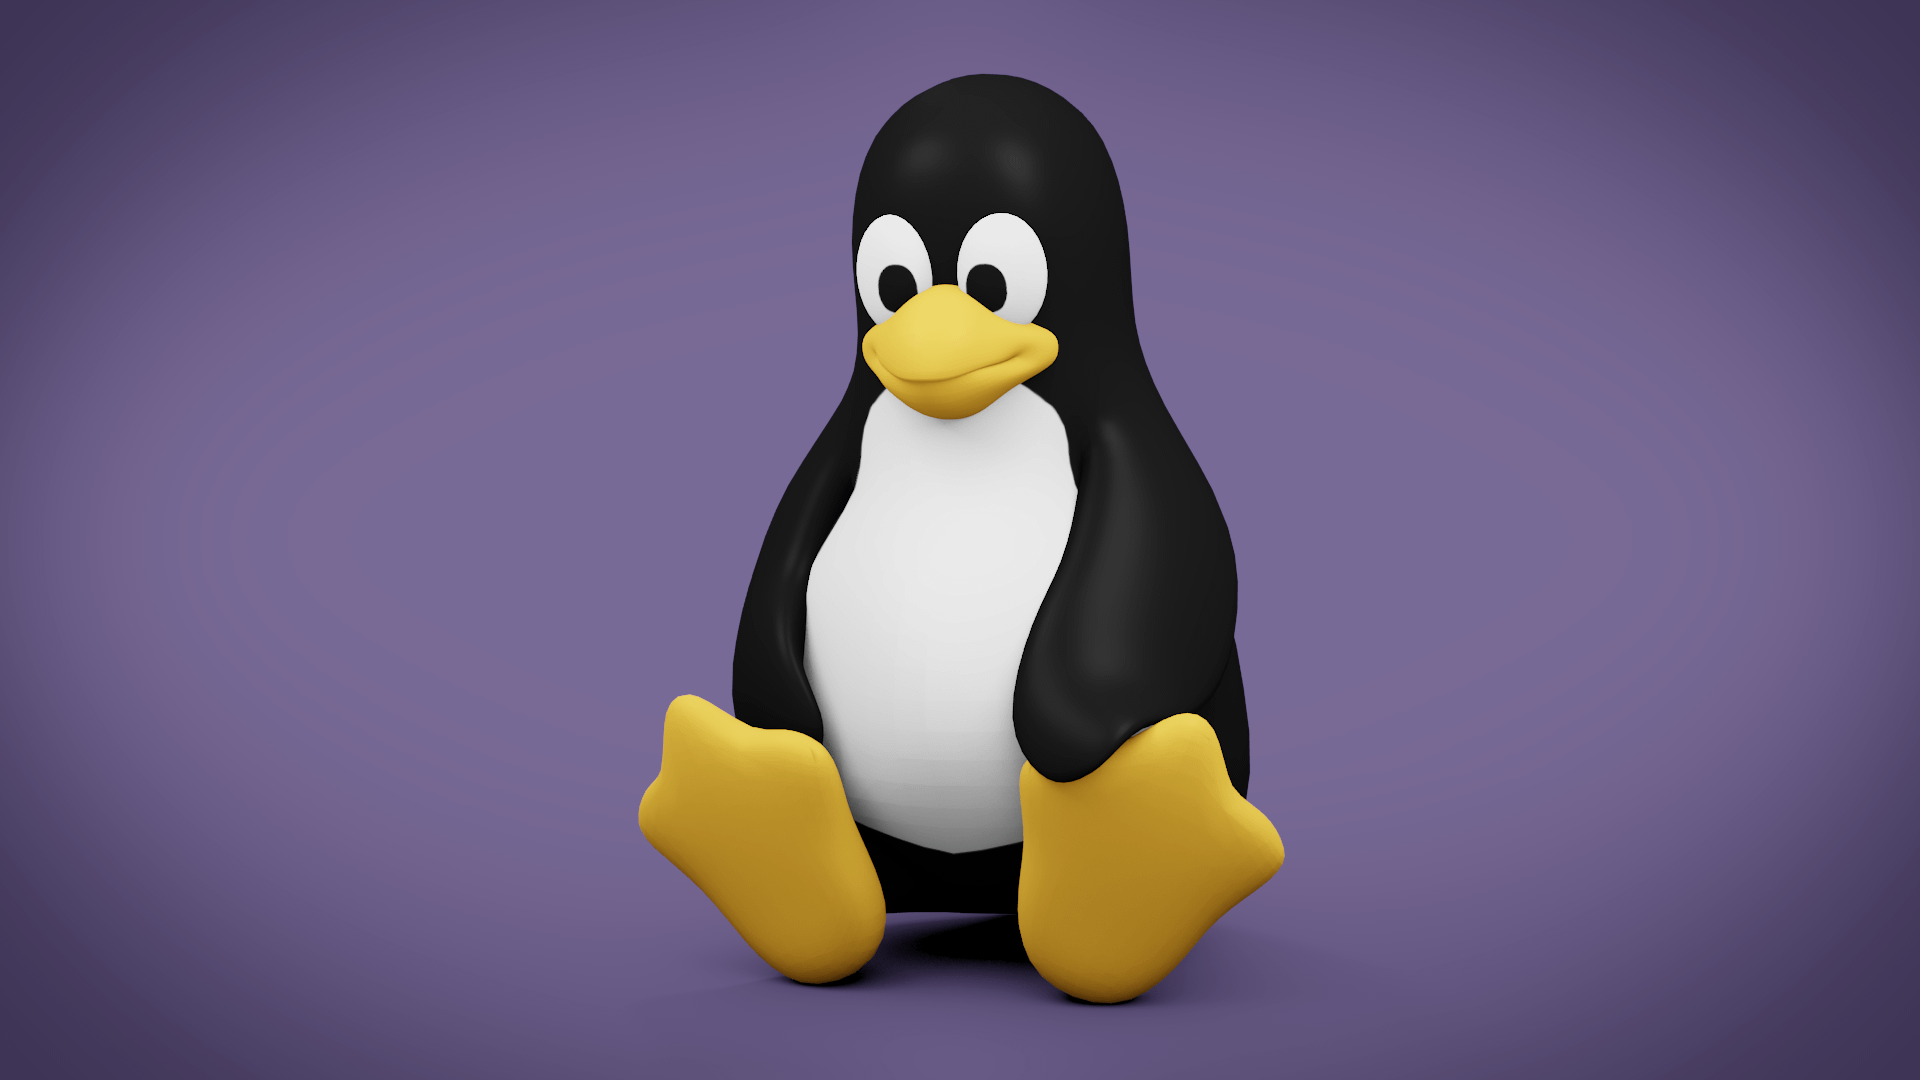 The Penguin Revolution: How Linux Went from Quirky Code to Global Phenomenon